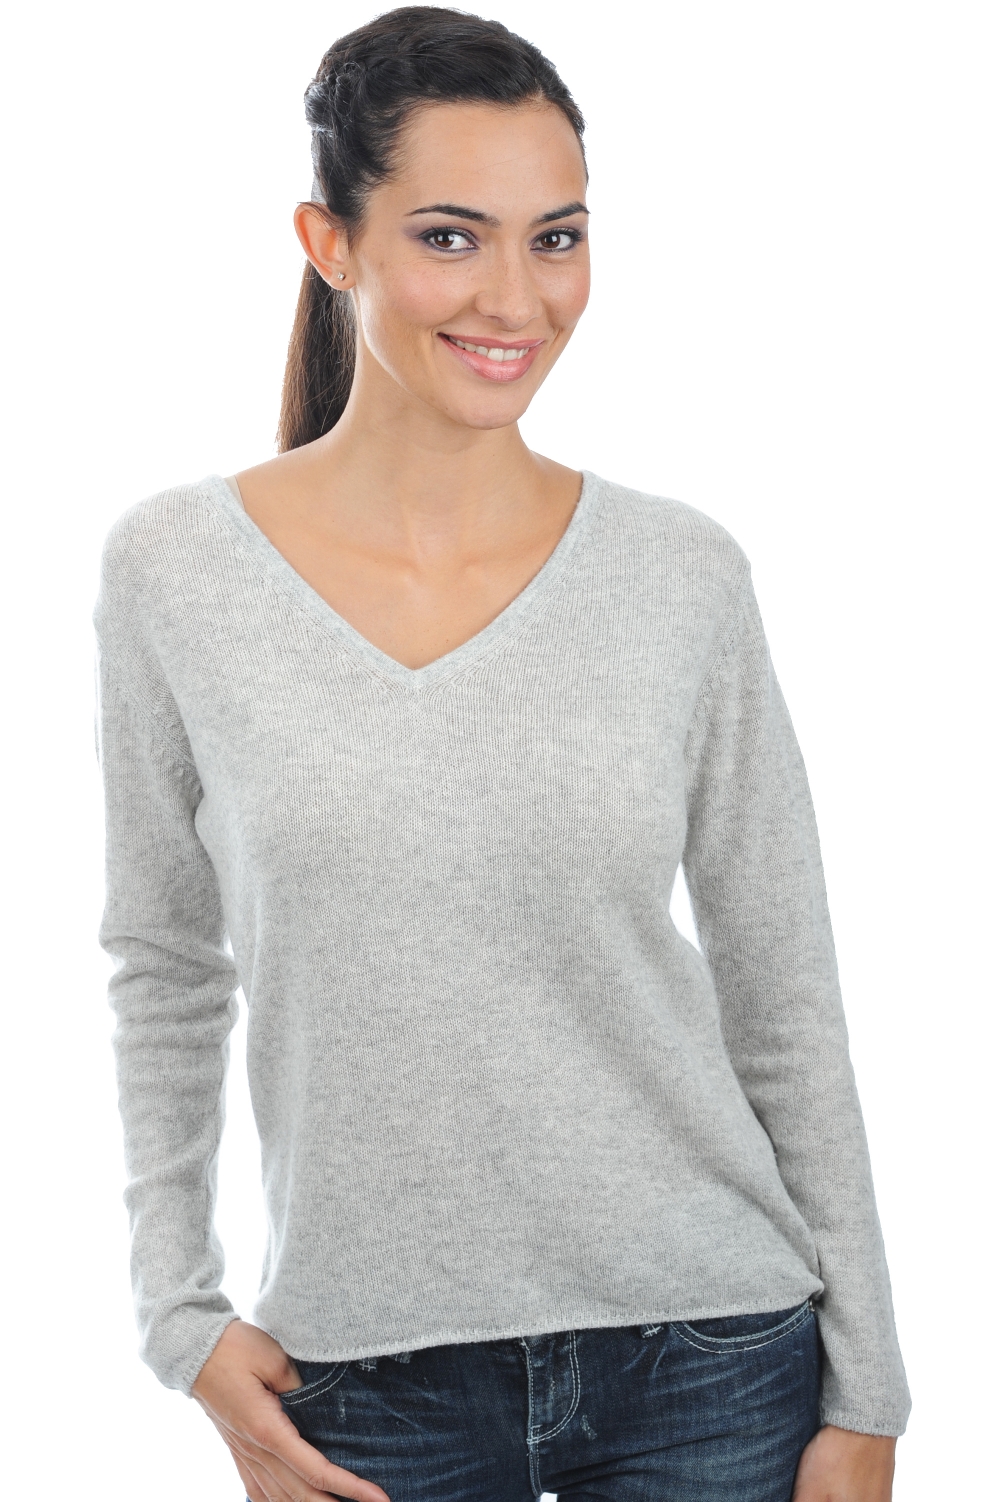 Cashmere ladies basic sweaters at low prices flavie flanelle chine s